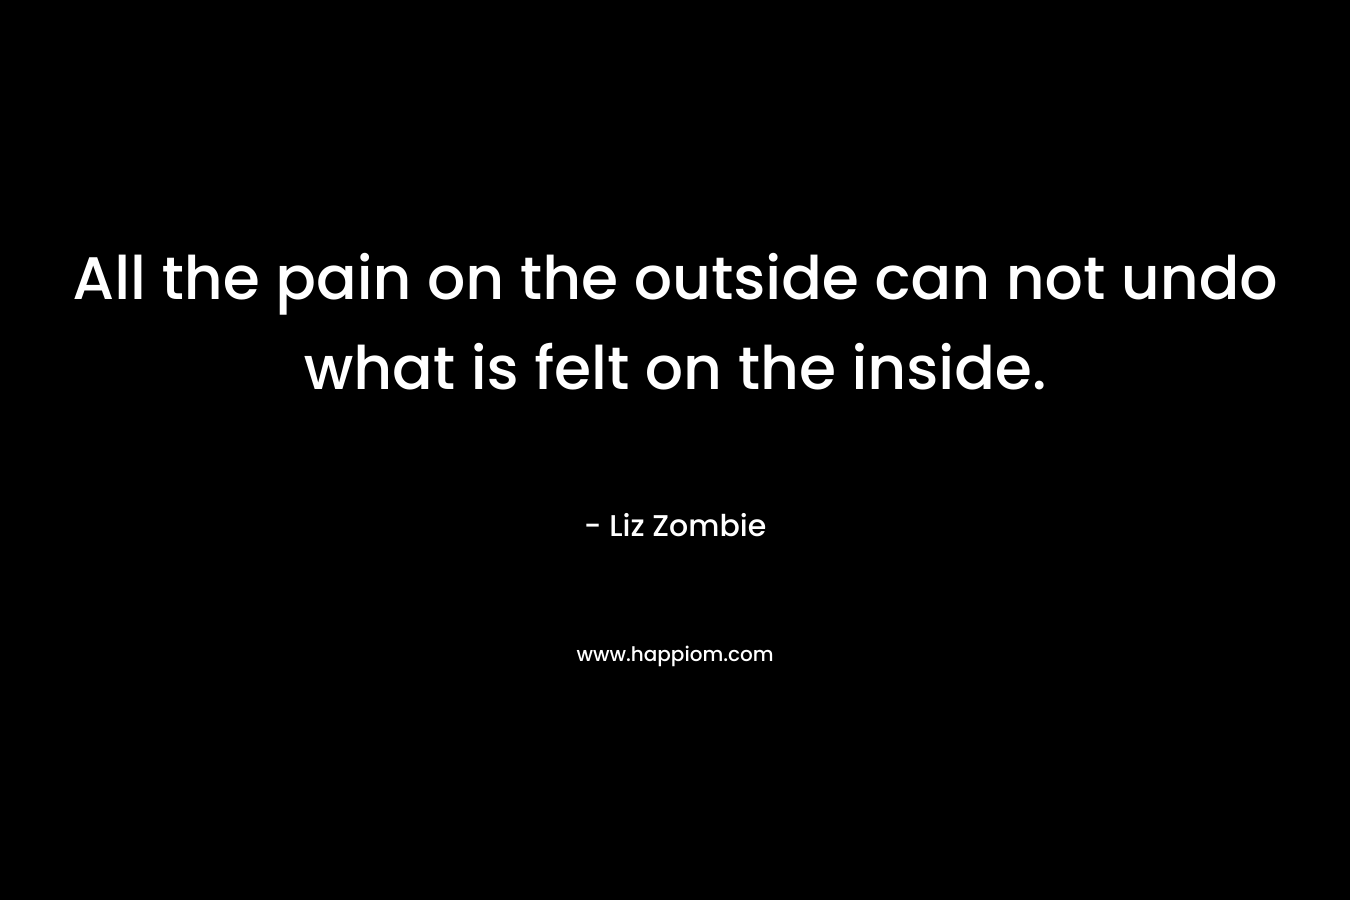 All the pain on the outside can not undo what is felt on the inside.